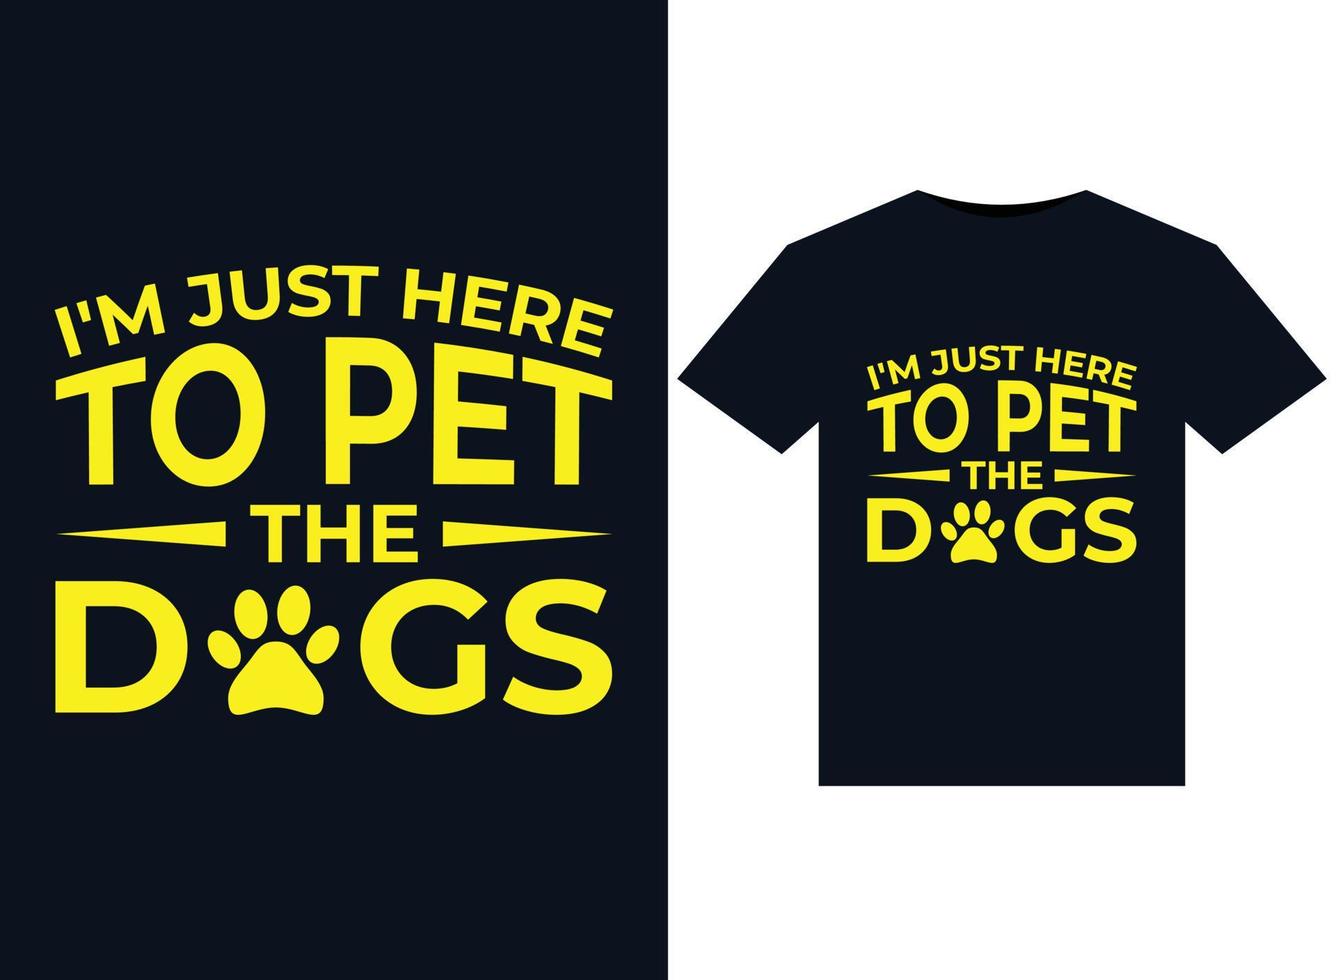 I'm Just Here to Pet The Dogs illustrations for print-ready T-Shirts design vector